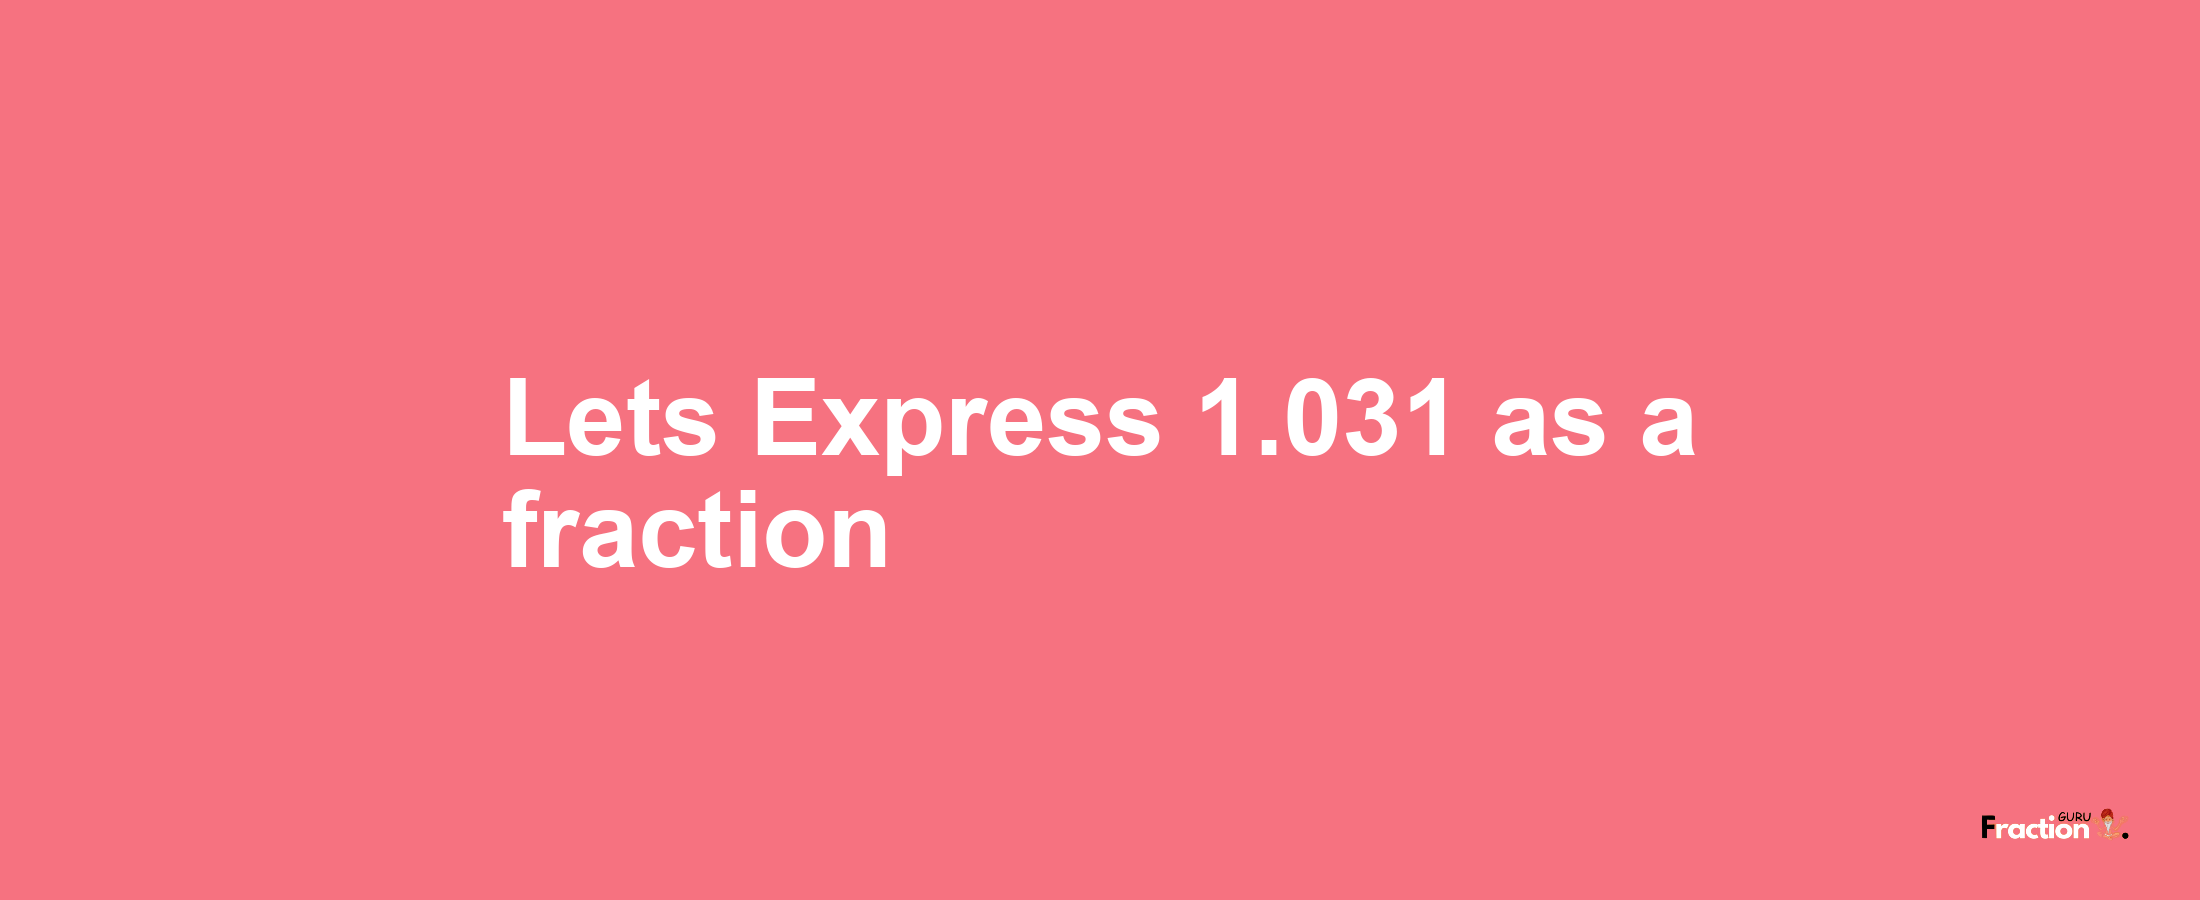 Lets Express 1.031 as afraction